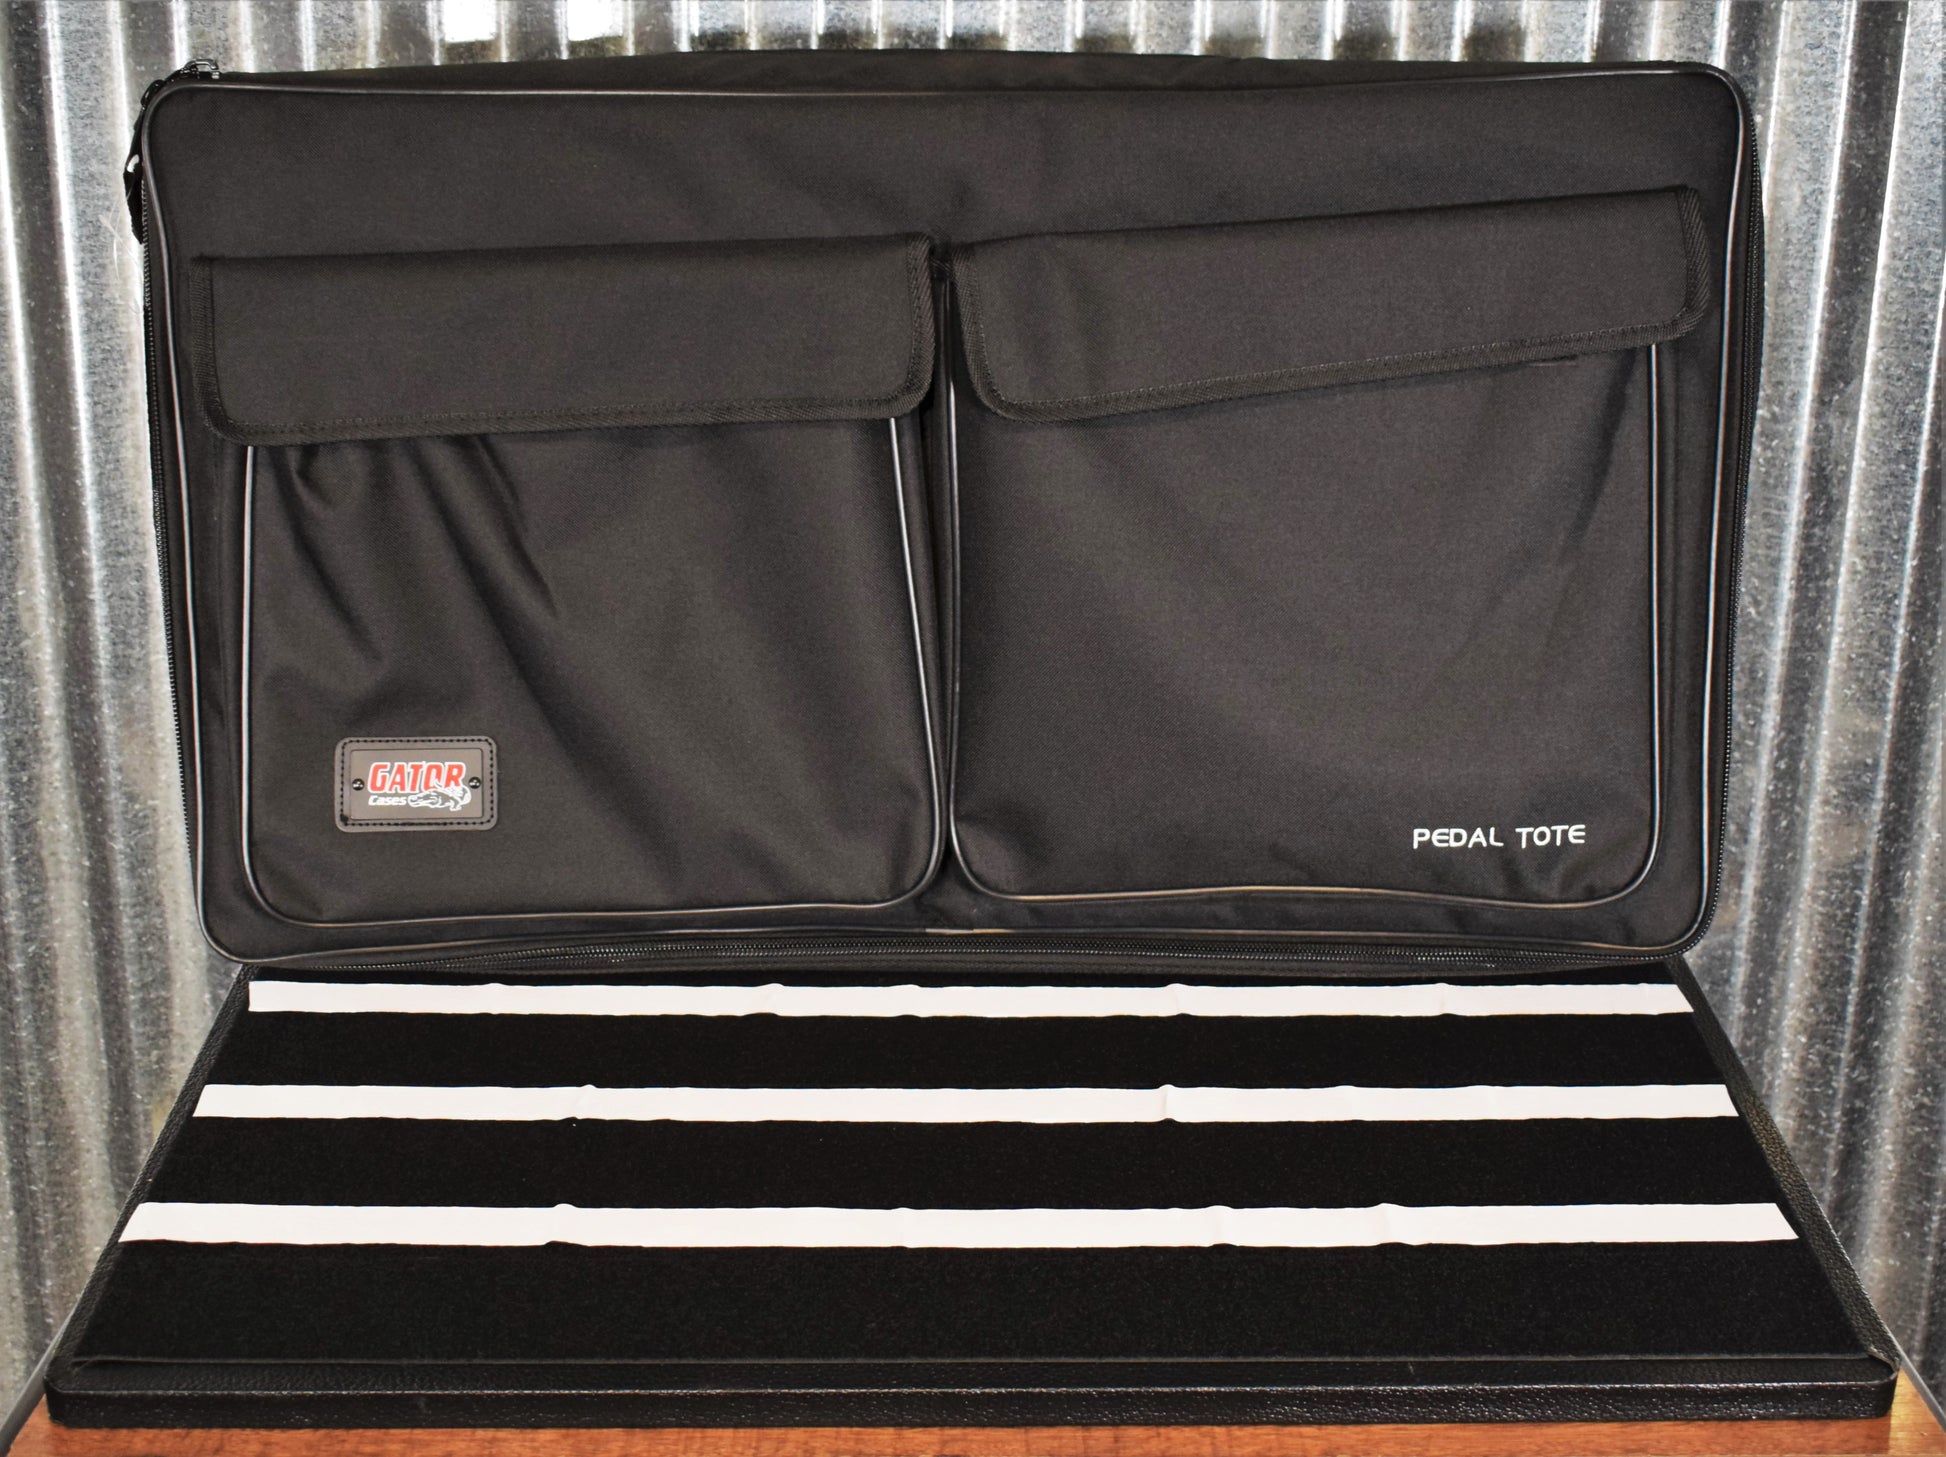 Gator GPT-BLACK - Pedal Board with Carry Bag